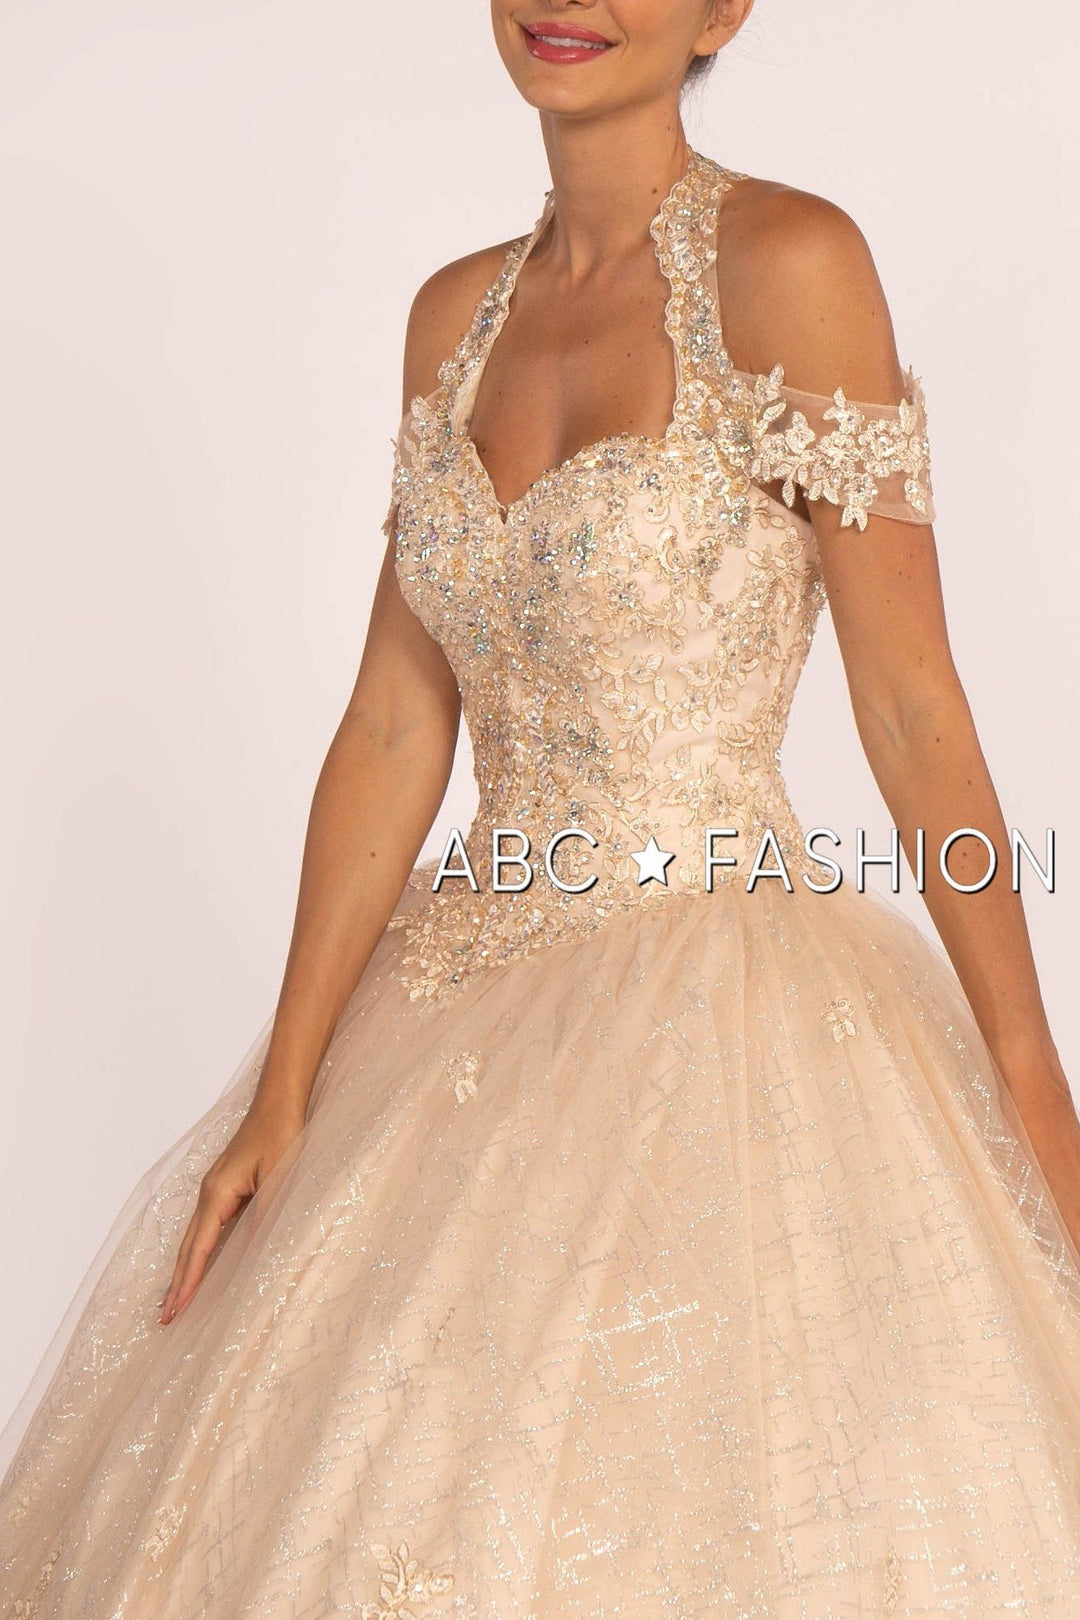 Embroidered Halter Ball Gown with Glitter Skirt by Elizabeth K GL2602-Quinceanera Dresses-ABC Fashion